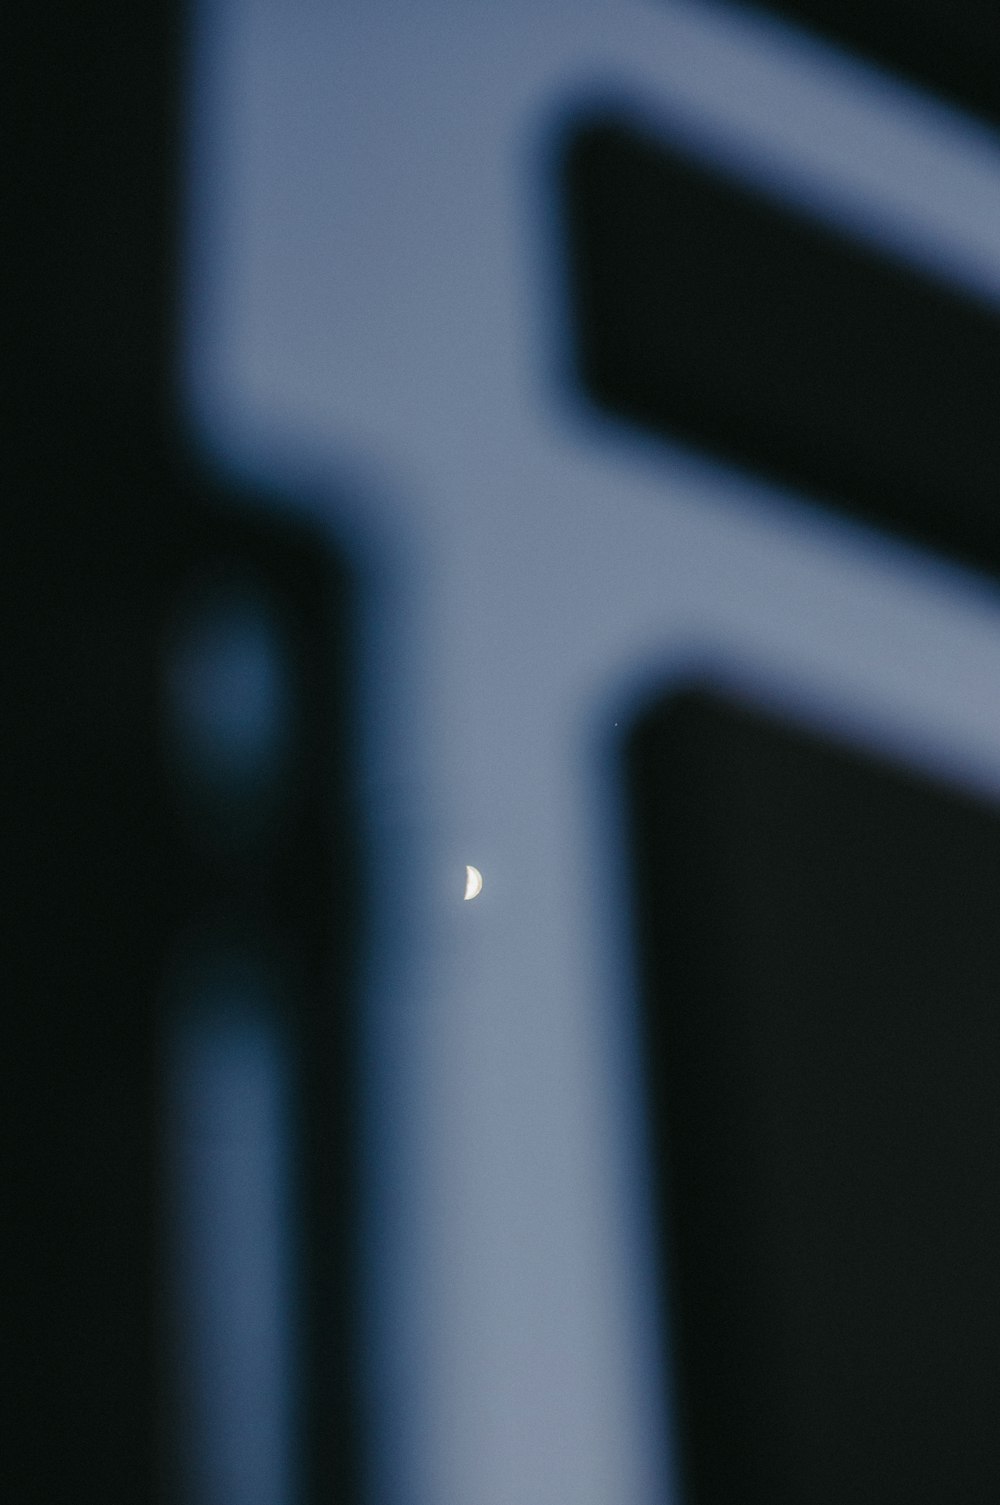 the moon is seen through the window of a building